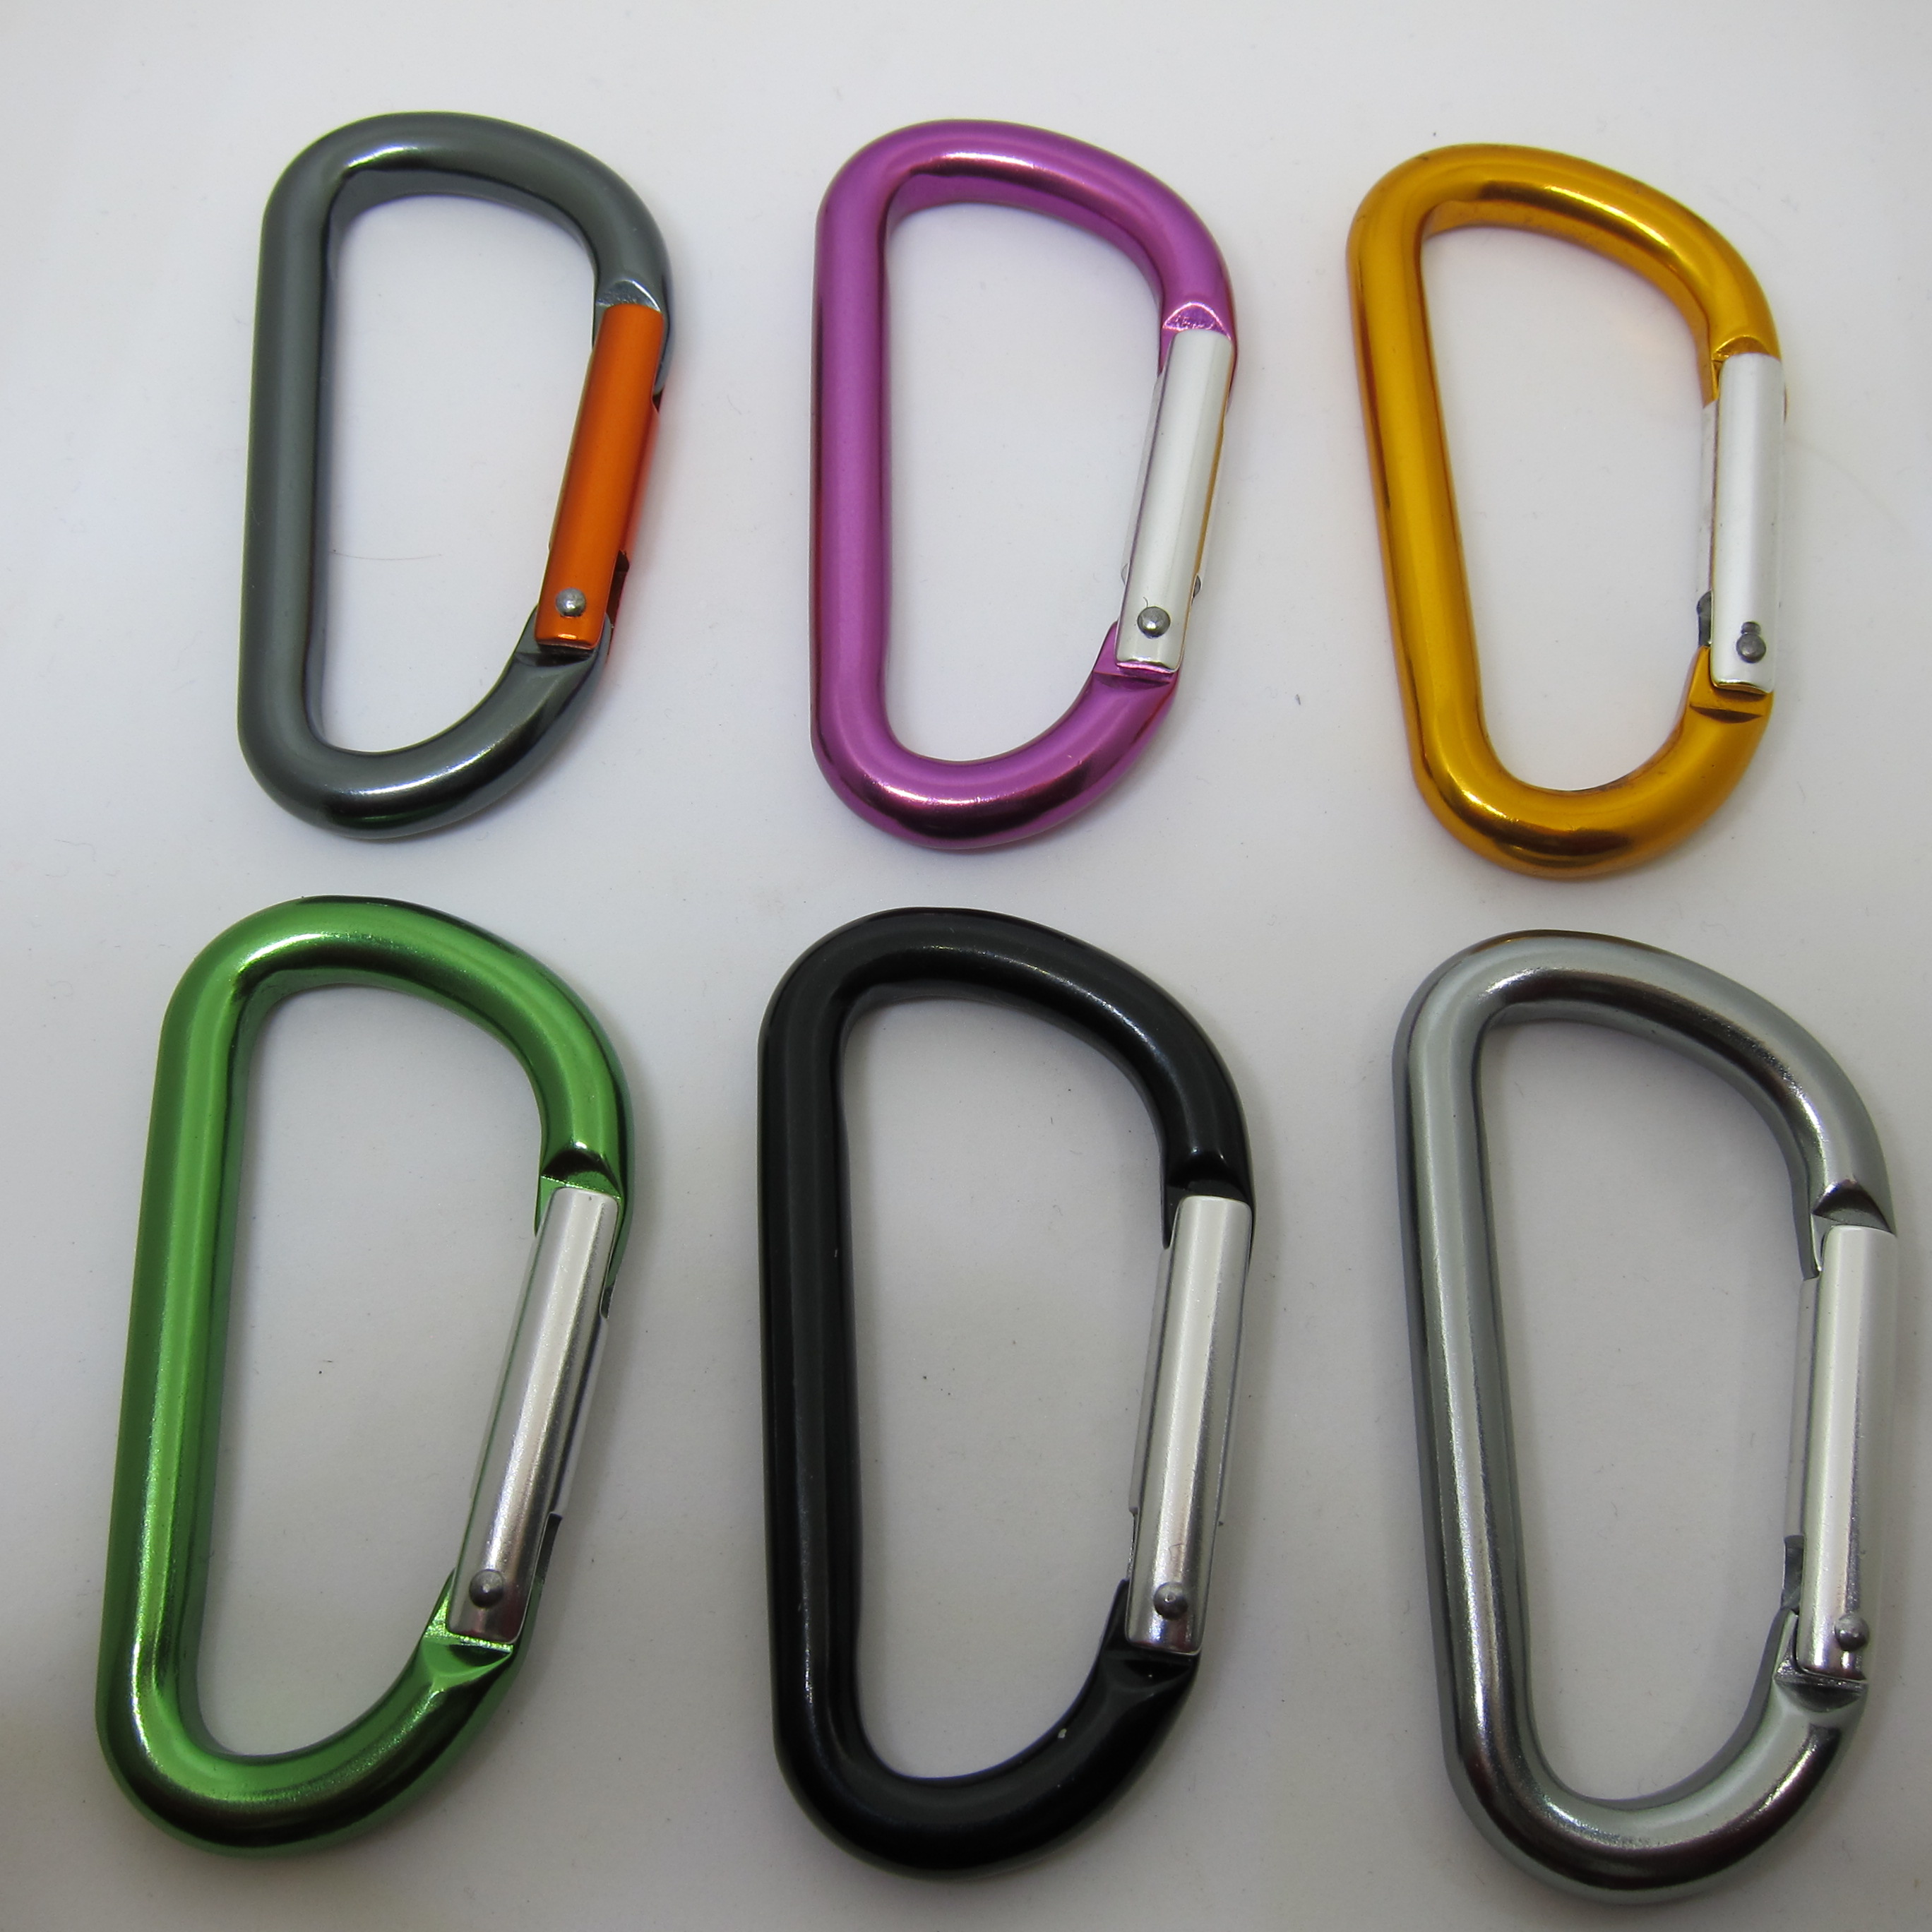 5mm, 6mm, 7mm, 8mm D type key chain carabiner | Taiwantrade.com